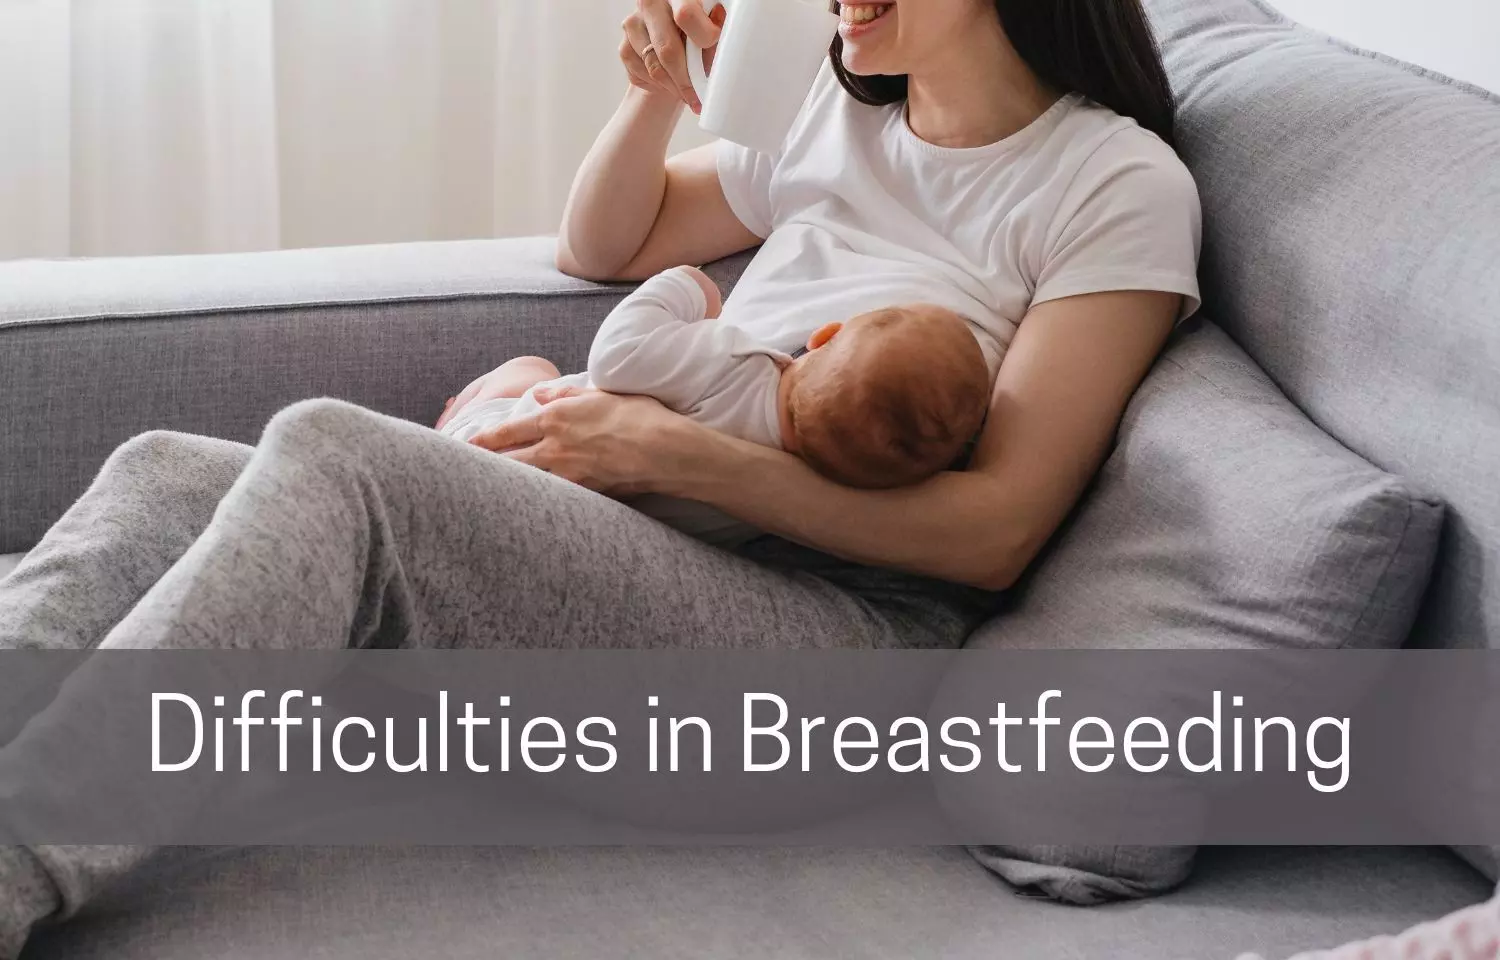 Difficulties in Breastfeeding: Indian Academy of Pediatric Guidelines